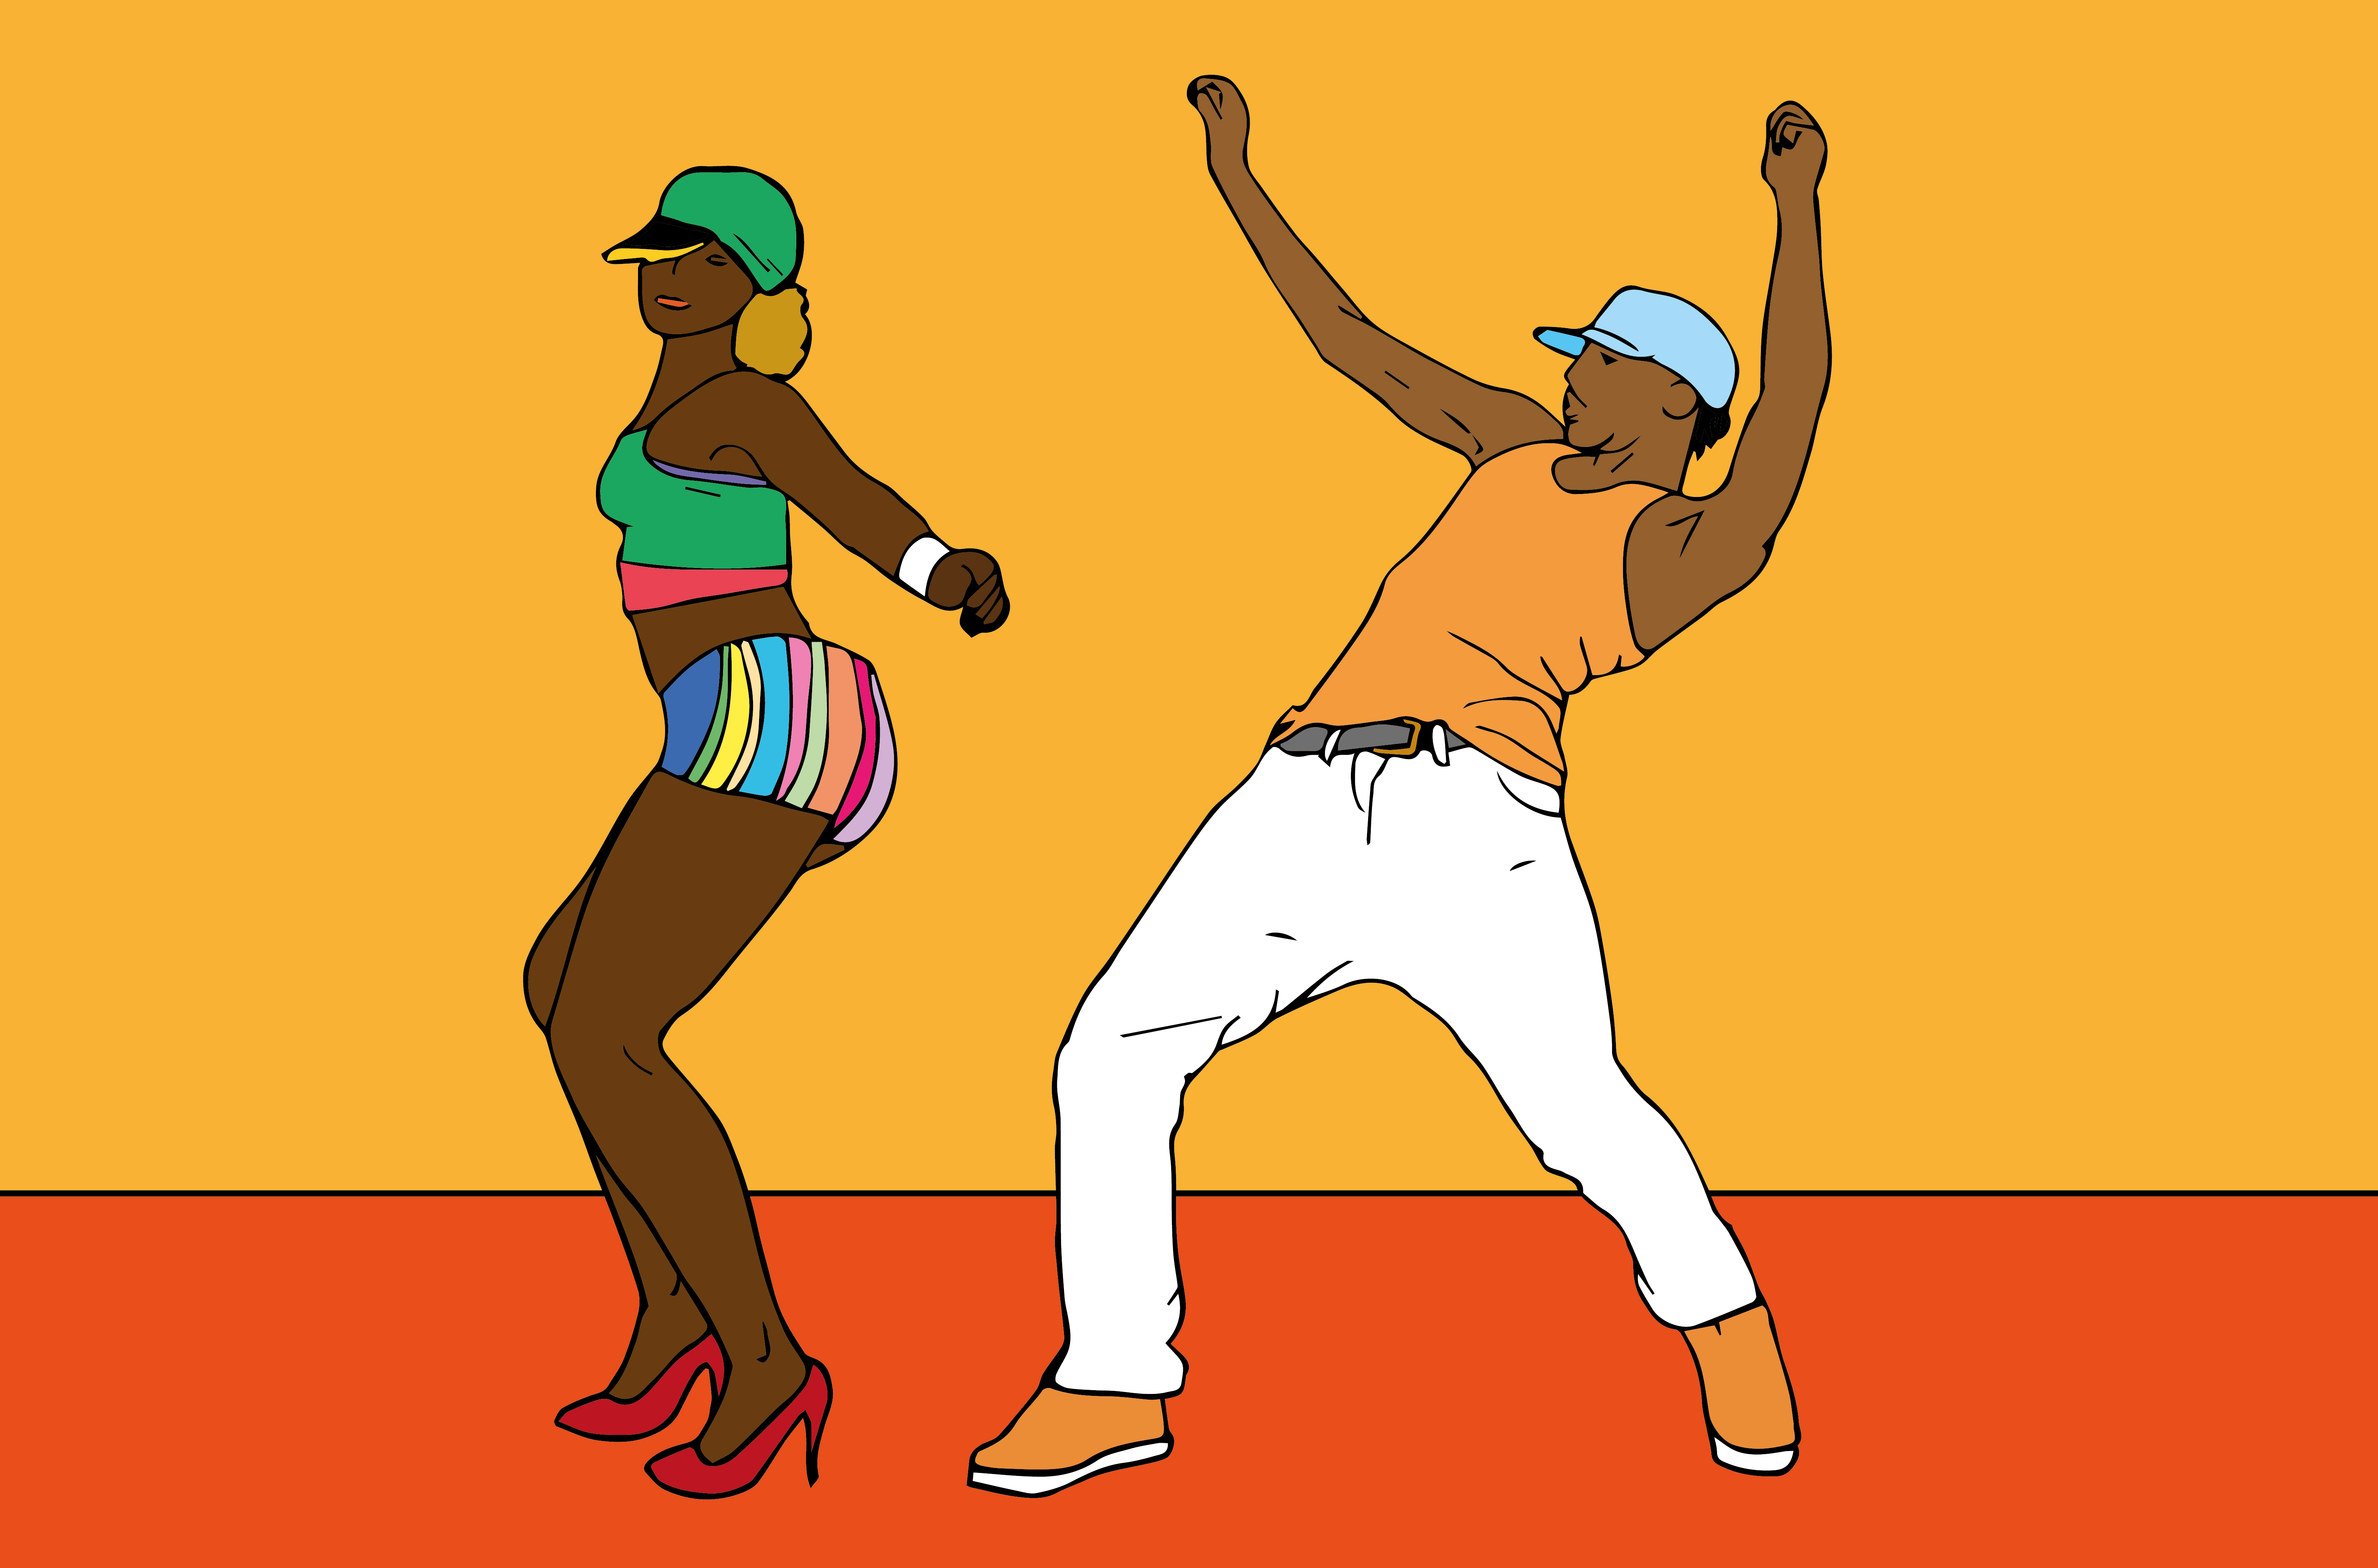 We need to talk about homophobia in the dancehall scene